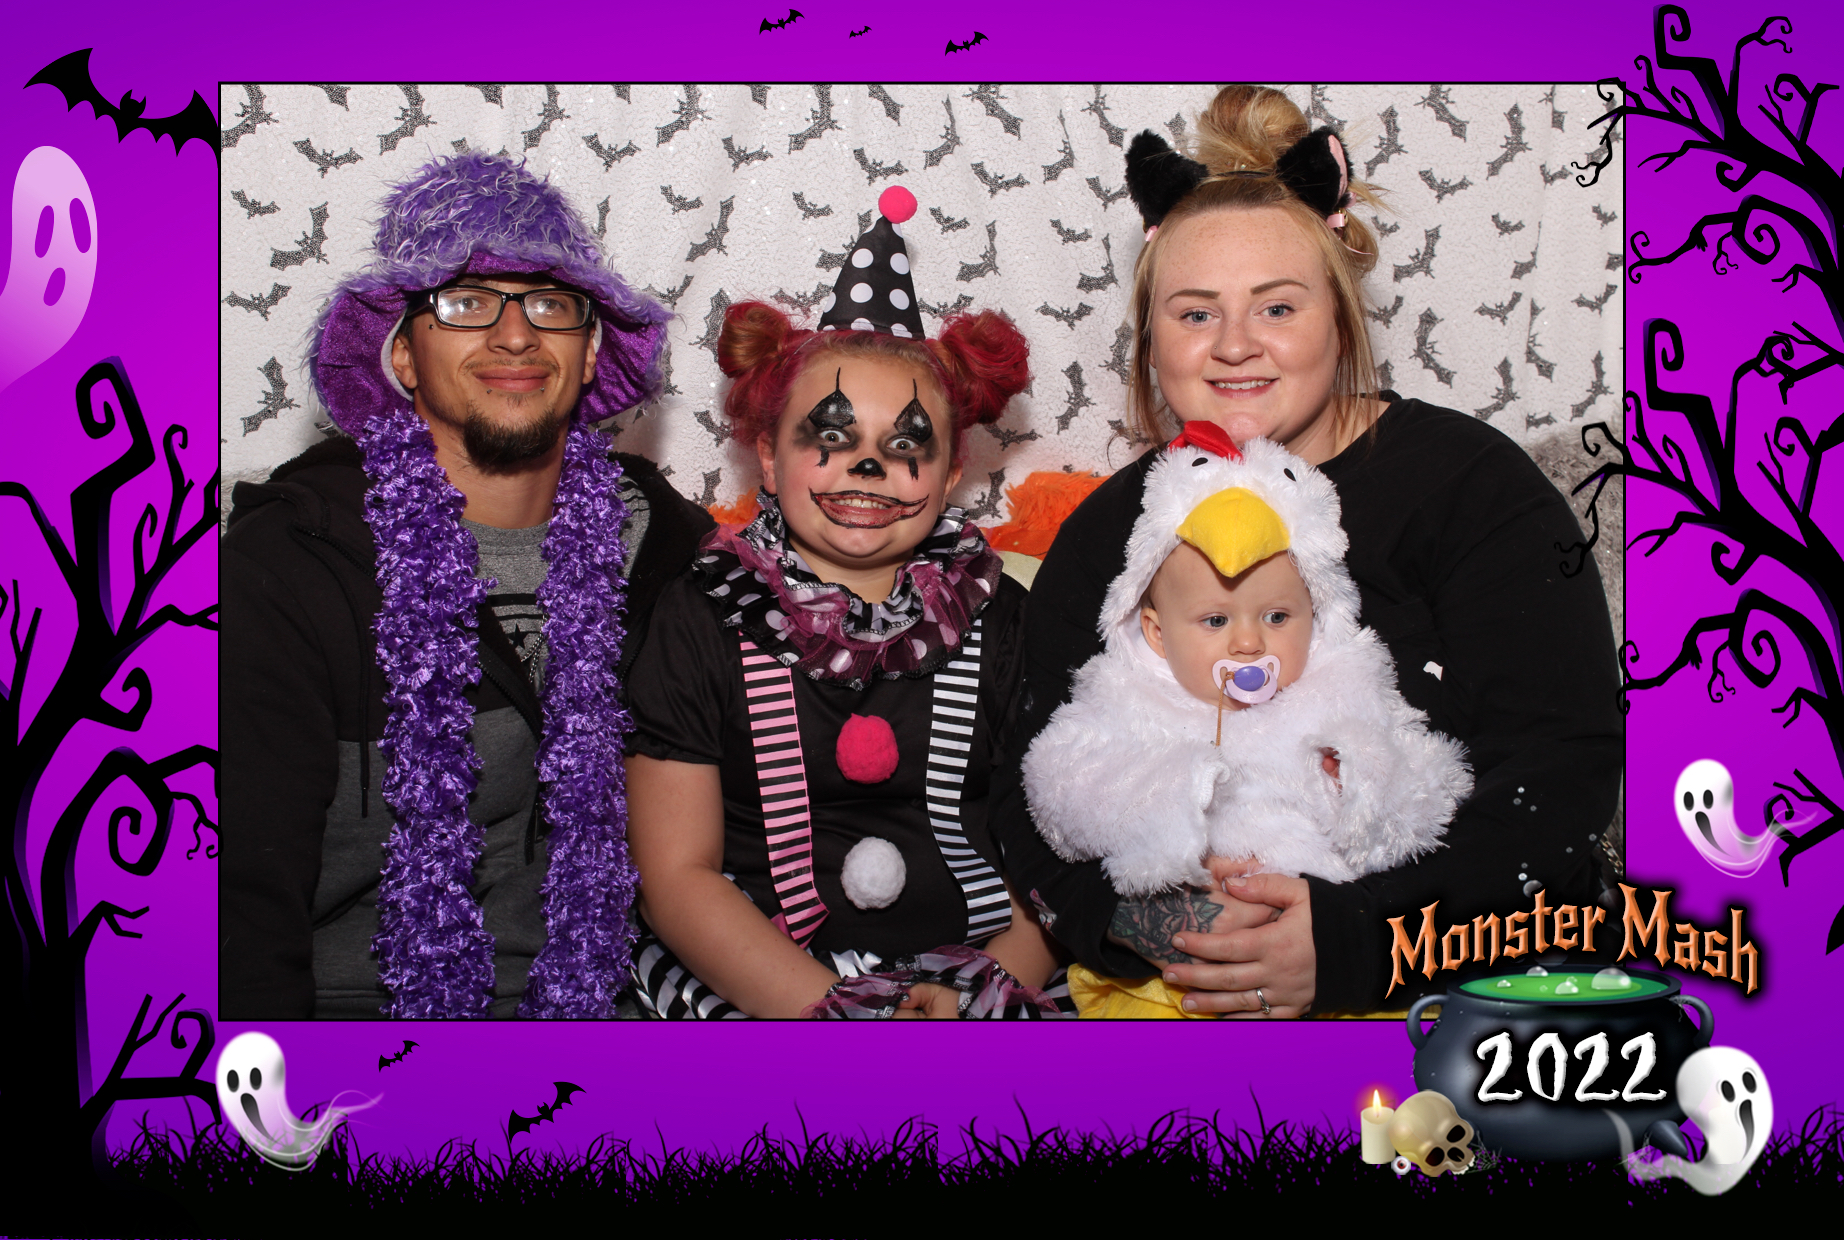 Sample photo from a monster mash Halloween event